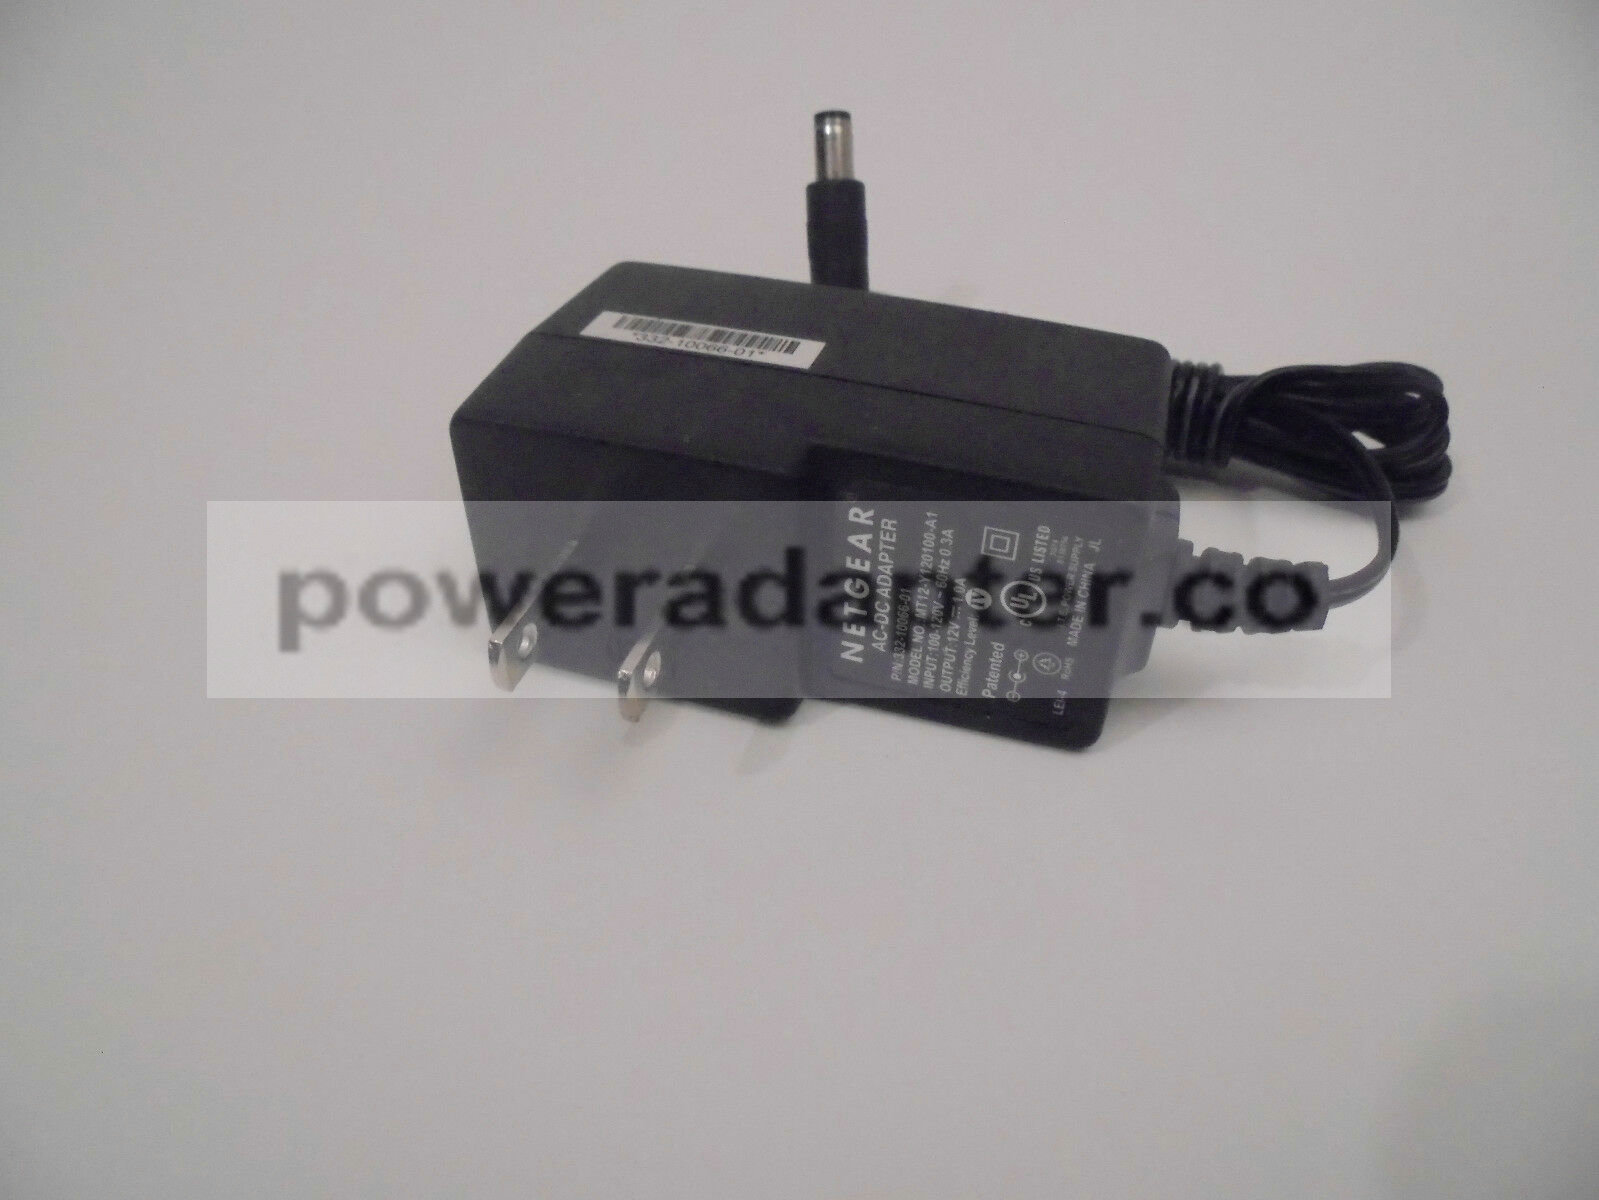 Netgear 332-10166-01 AC-DC Adapter MT12-Y120100-A1 Condition: new Country/Region of Manufacture: China Brand: Netgea